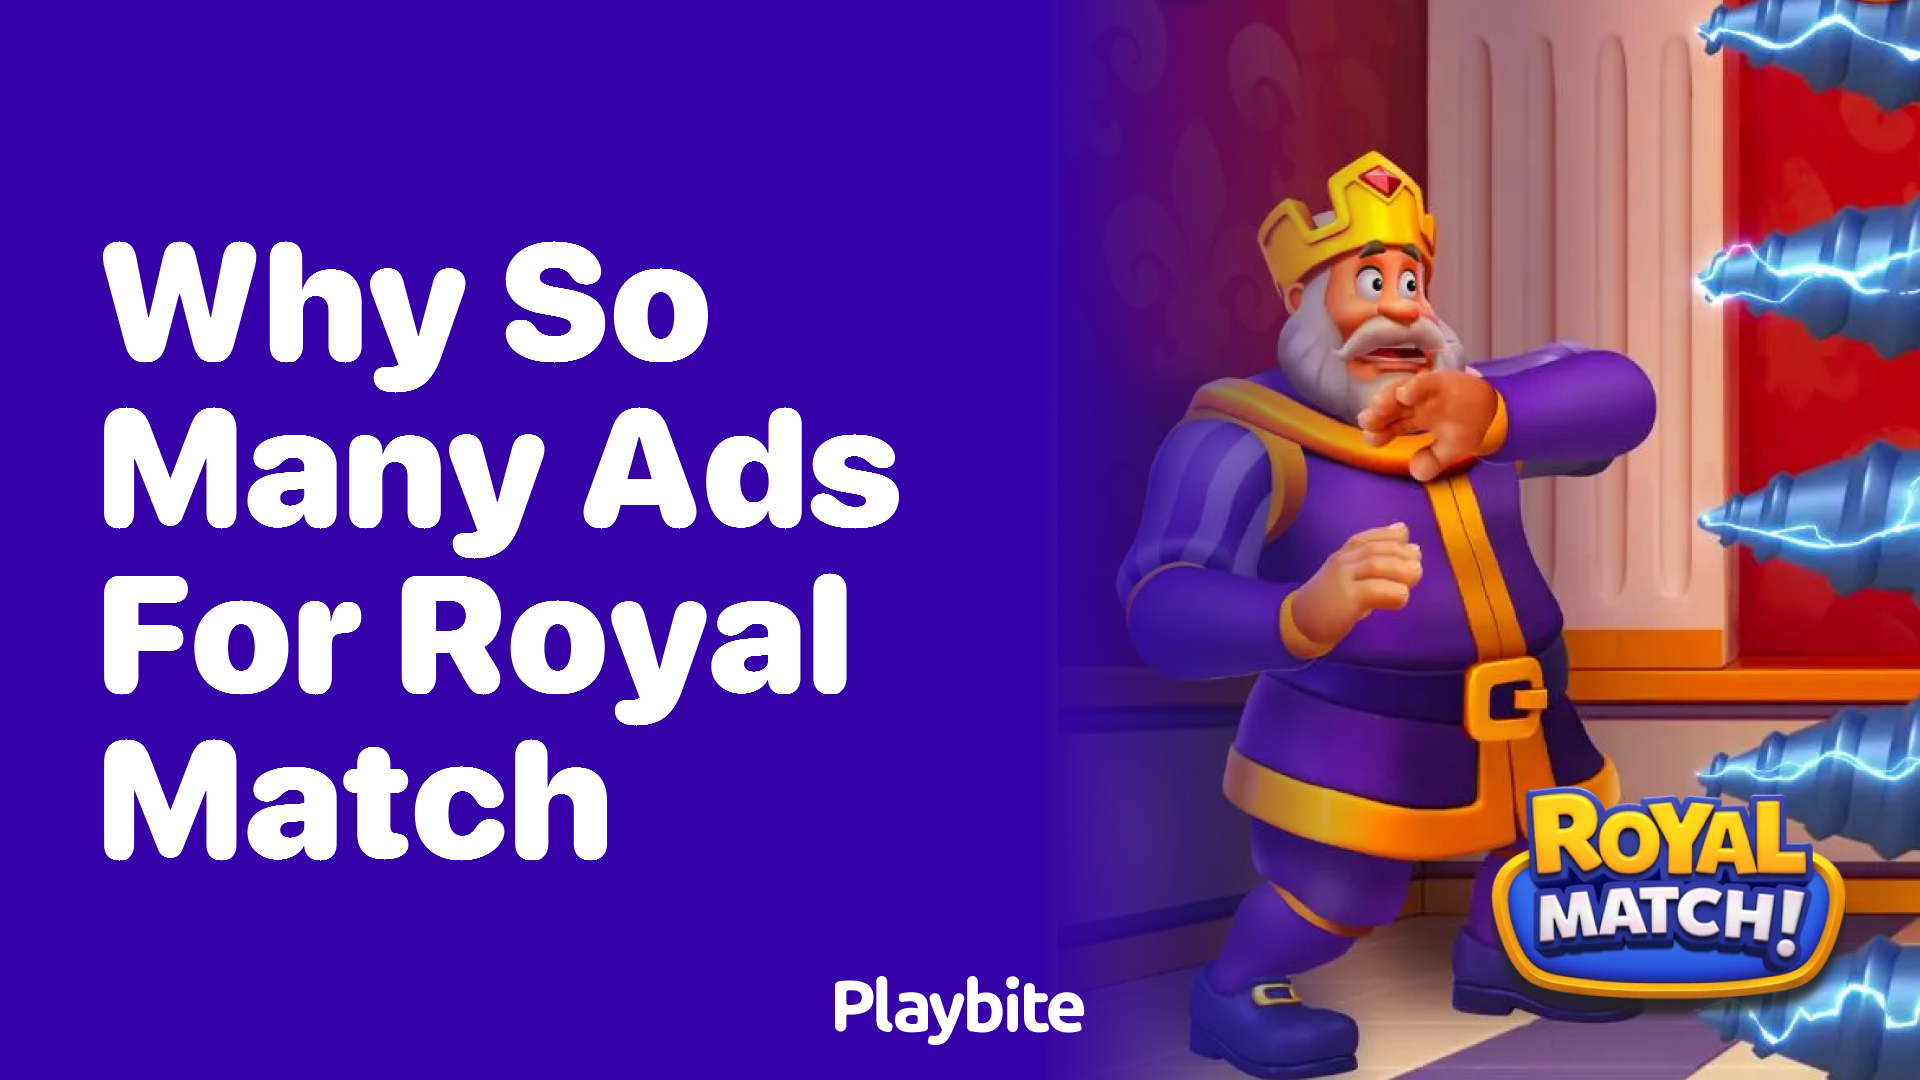 Why Are There So Many Ads for Royal Match?